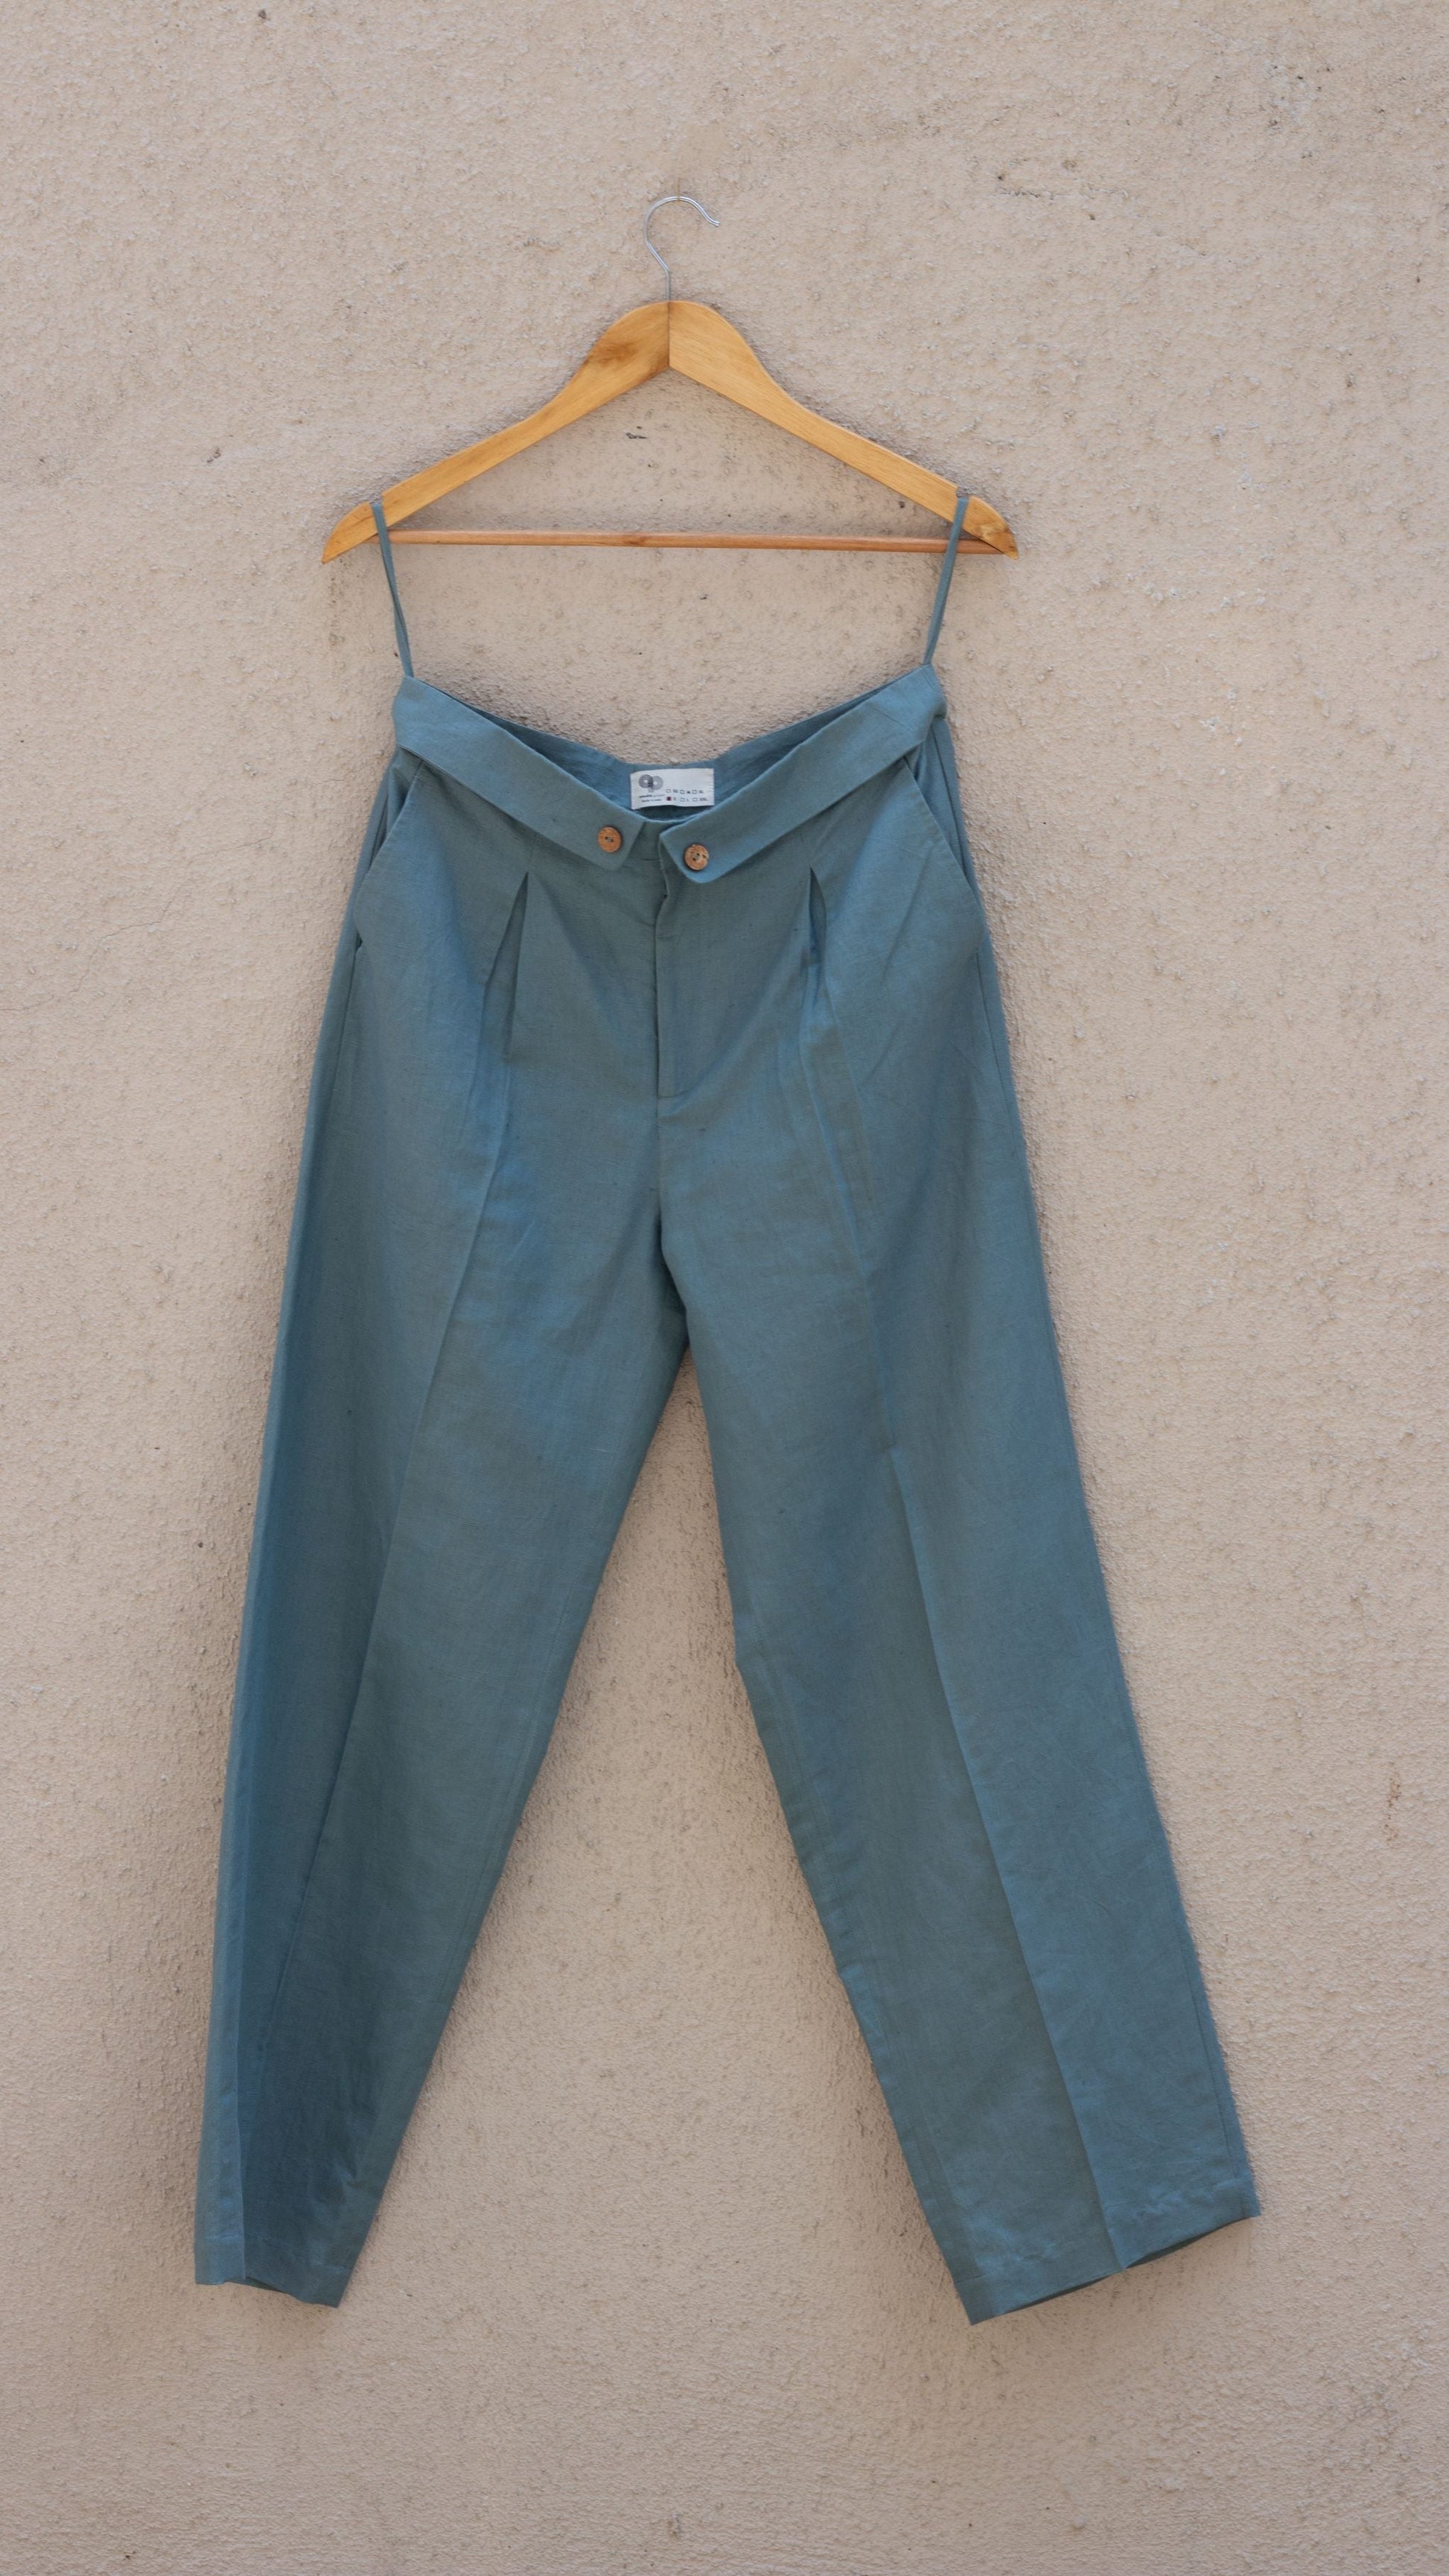 Blue Solid Cotton Pants at Kamakhyaa by Anushé Pirani. This item is Blue, Casual Wear, Cotton, Cotton Hemp, For Him, Handwoven, Hemp, Mens Bottom, Menswear, Pants, Regular Fit, Shibumi Collection, Solids